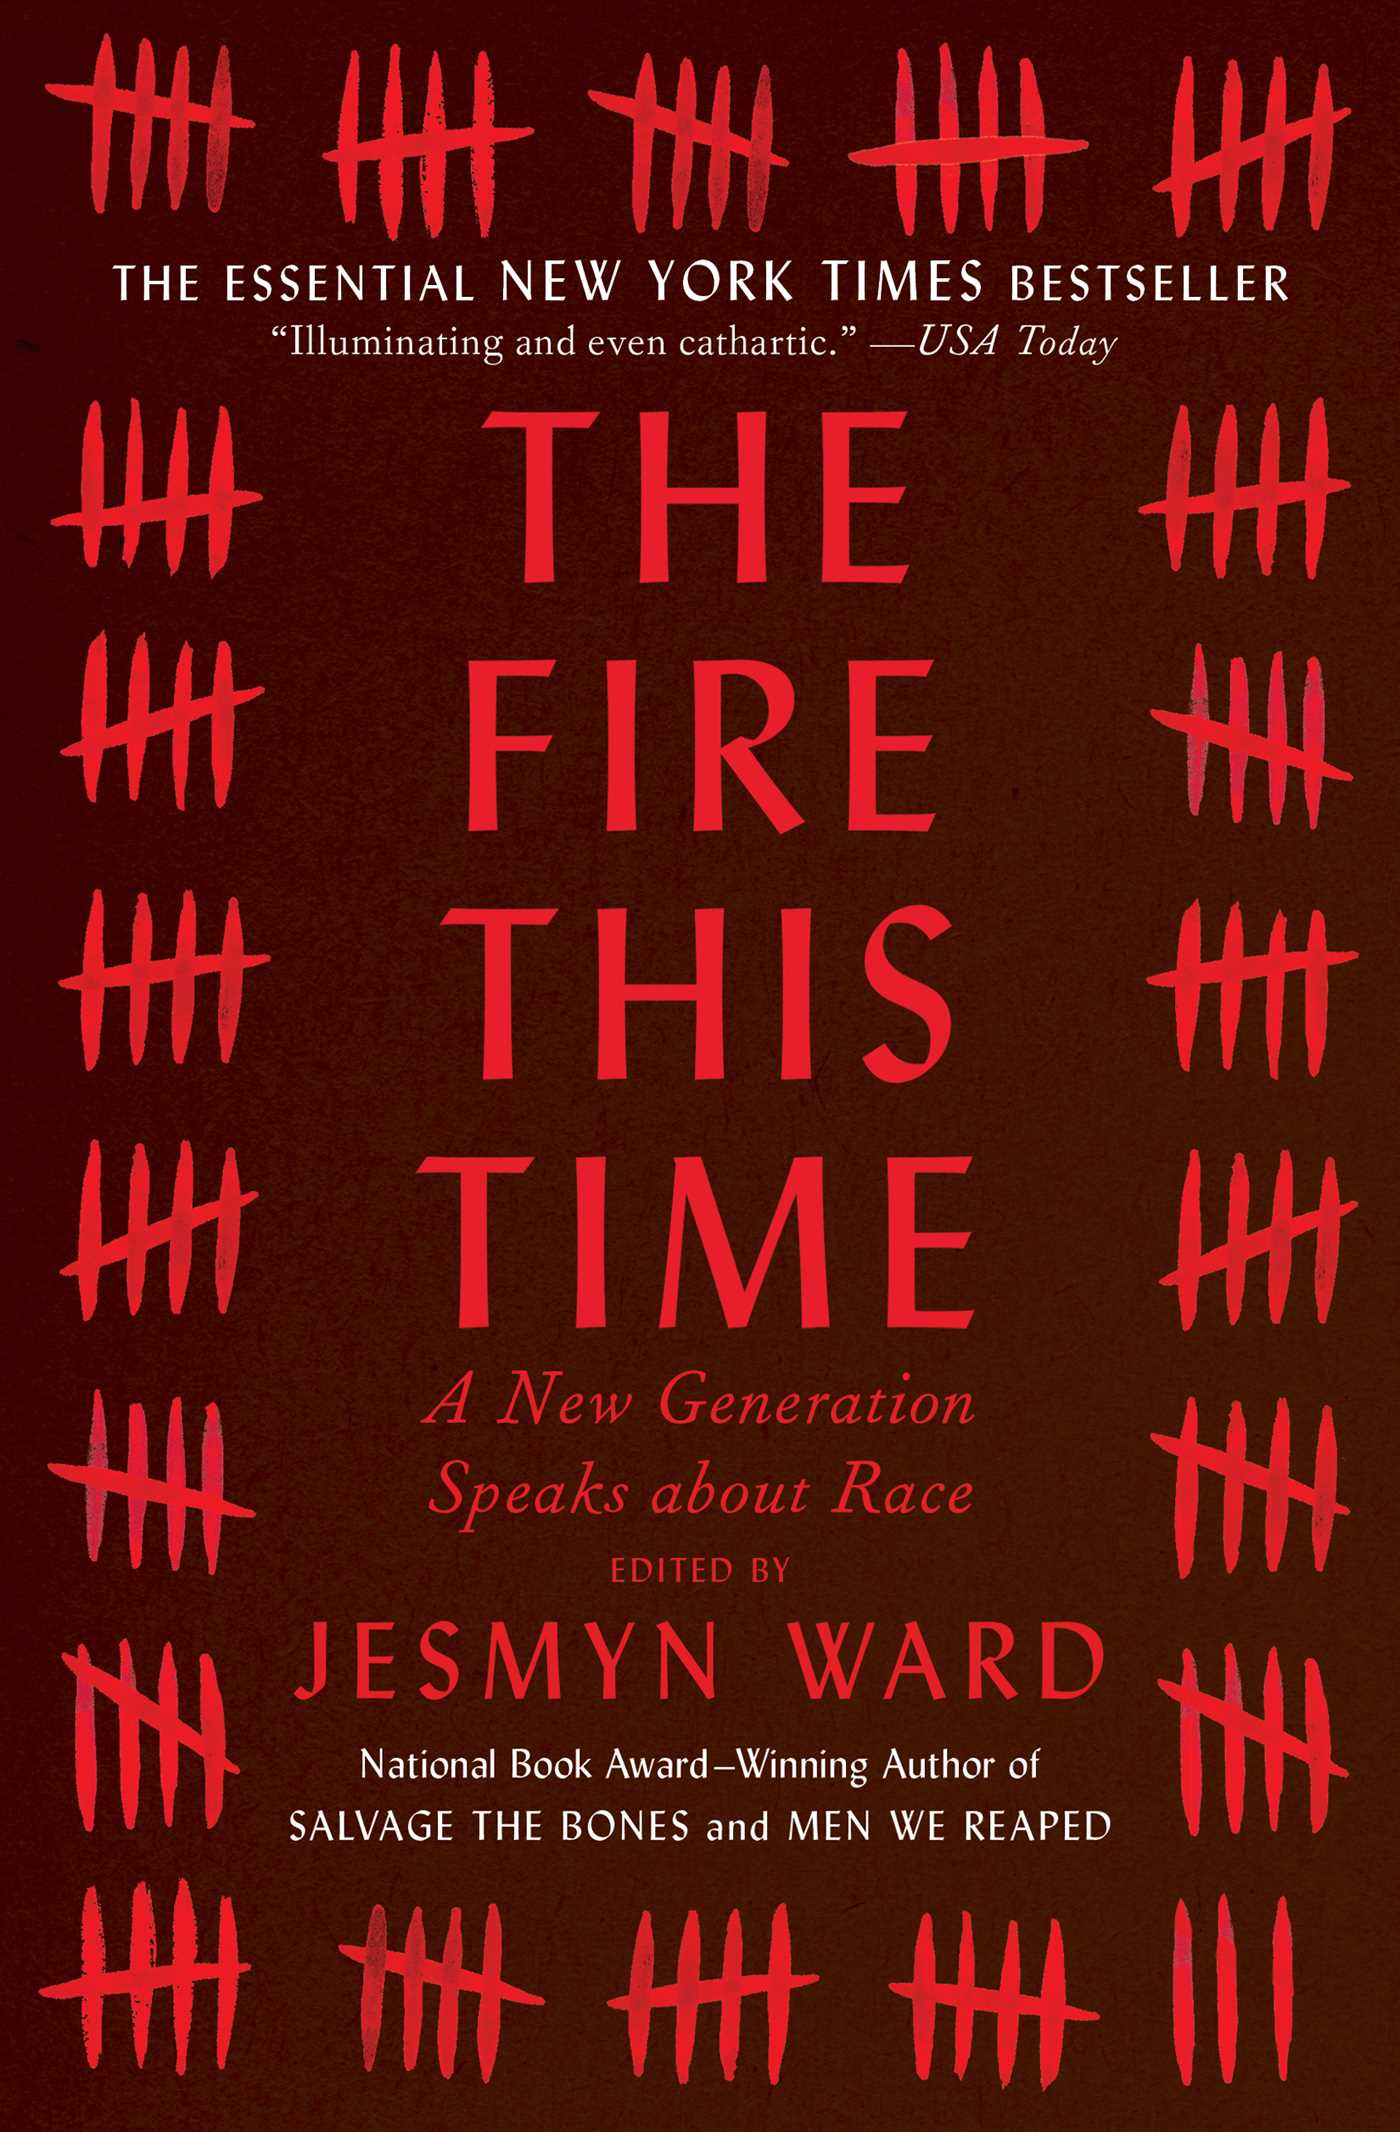 Image of the book cover of The Fire This Time by Jesmyn Ward. Dark maroon/red background with red tick marks all around the border. The title of the book is also red and goes down the middle of the cover.